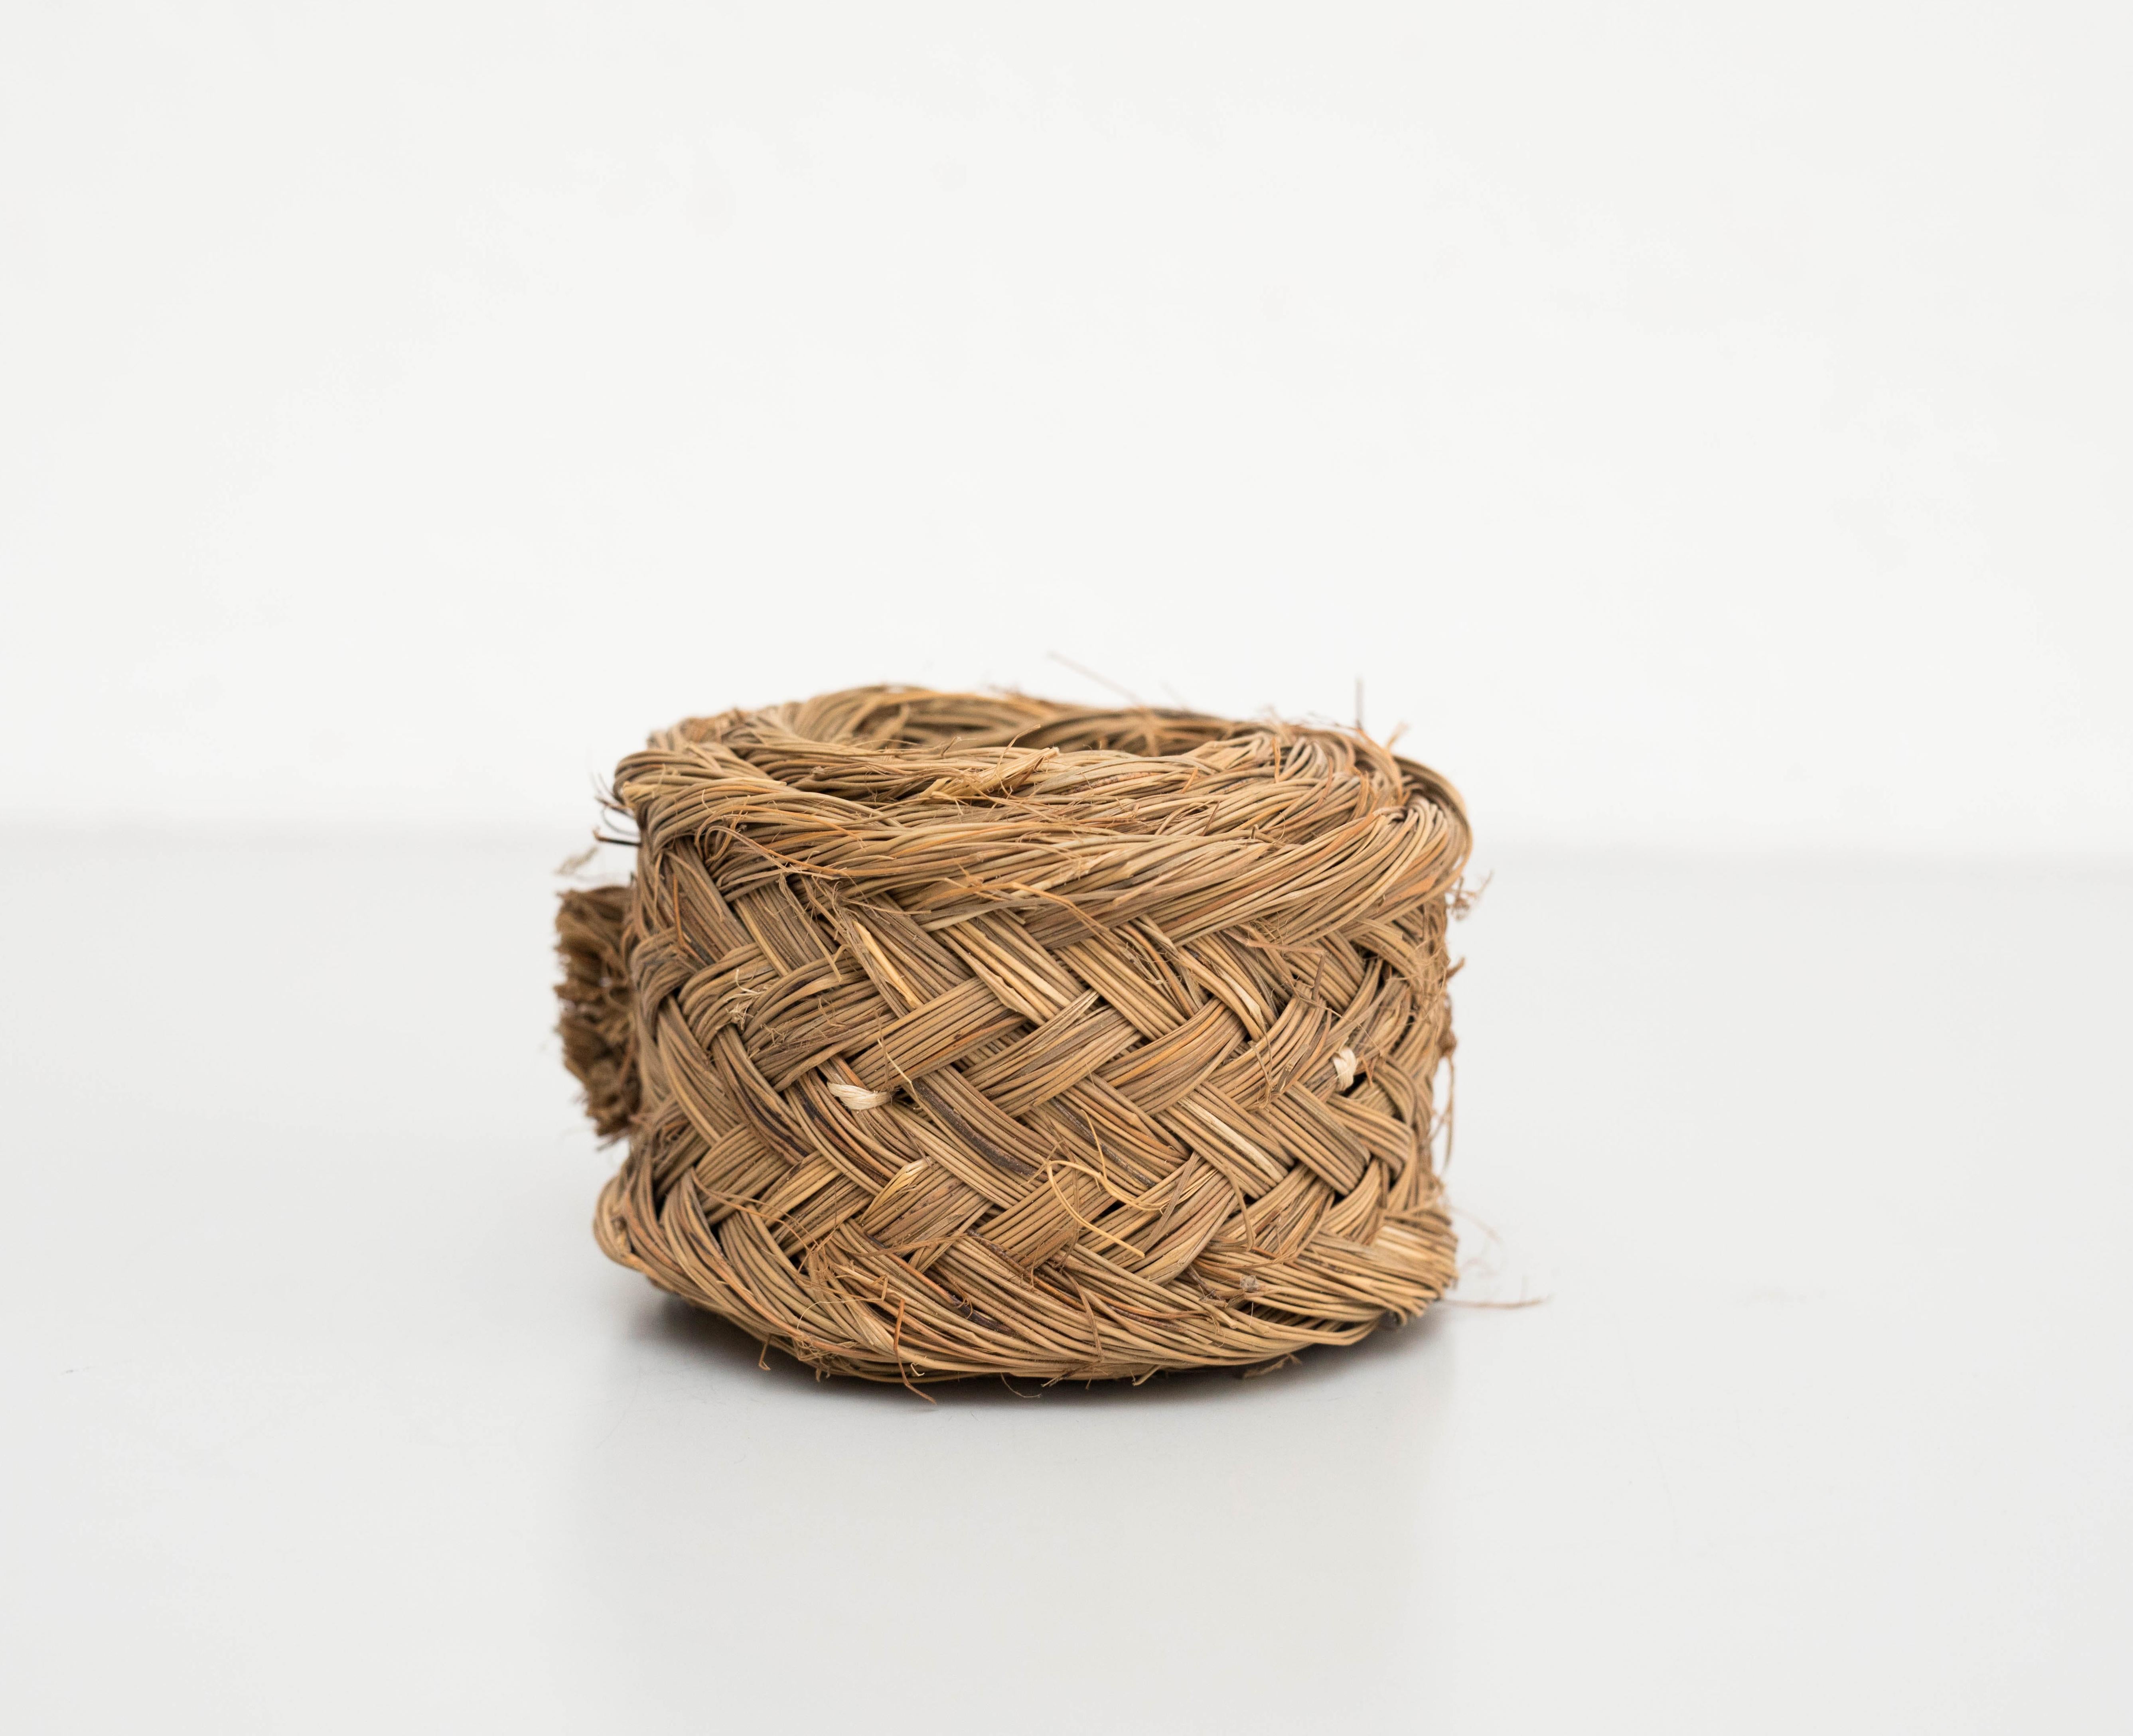 Mid-Century Modern Rustic Rattan Decorative Object, 1960 For Sale